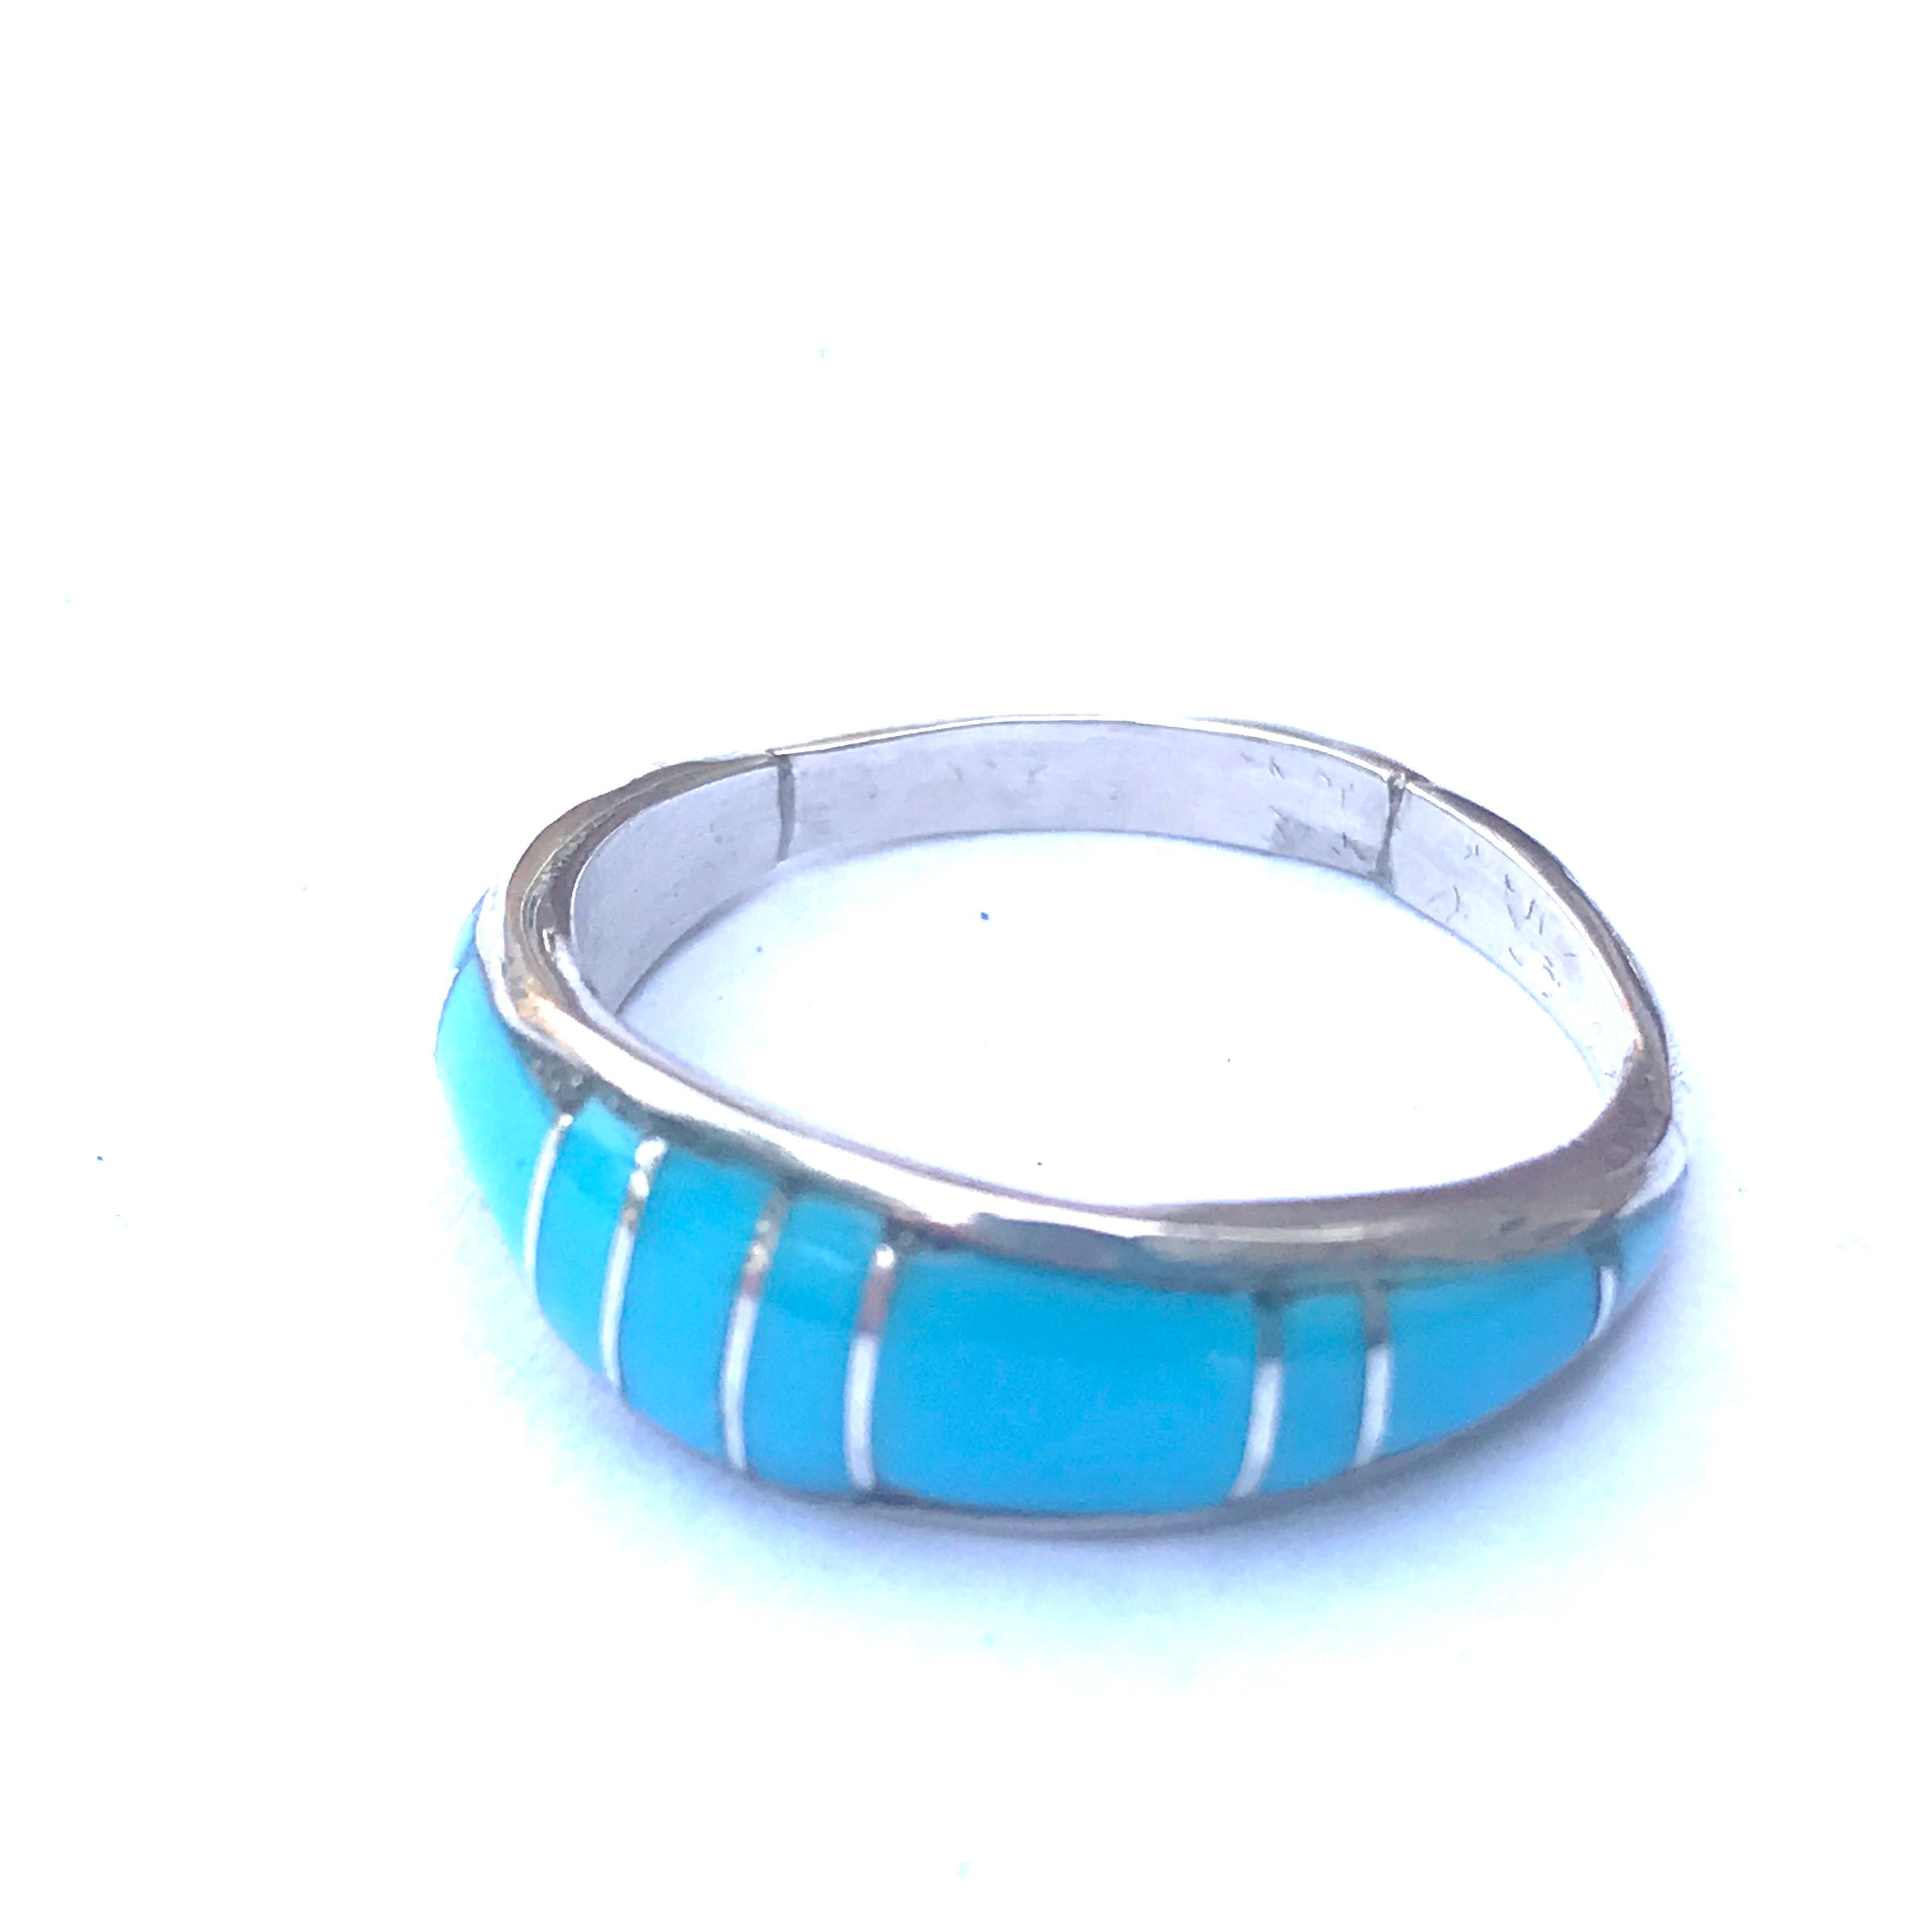 Inlaid sterling silver /turquoise ring